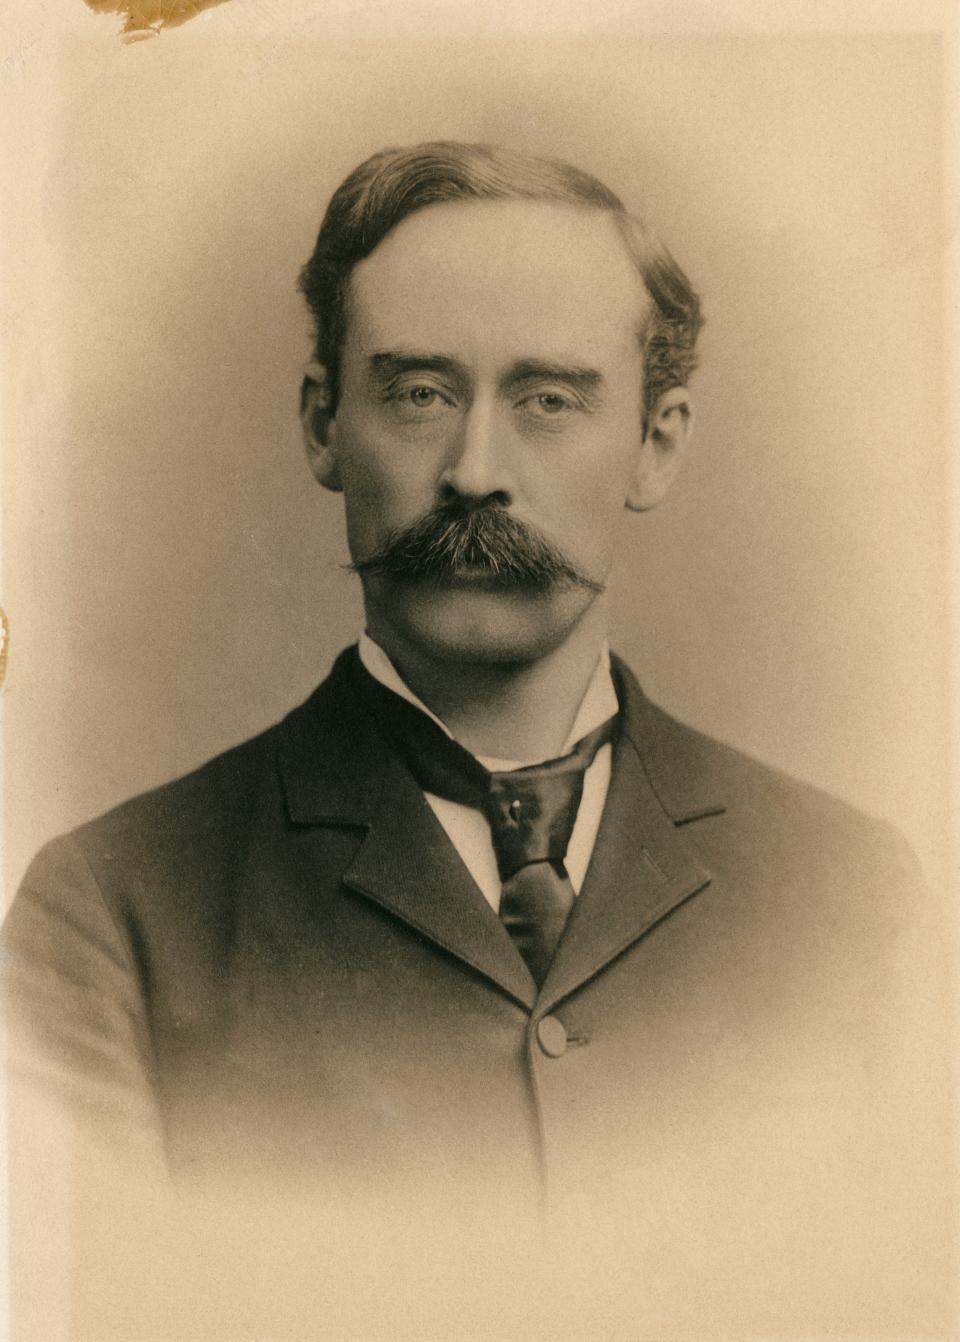 Portrait of Robert Peary, with a mustache and in a formal 19th-century suit